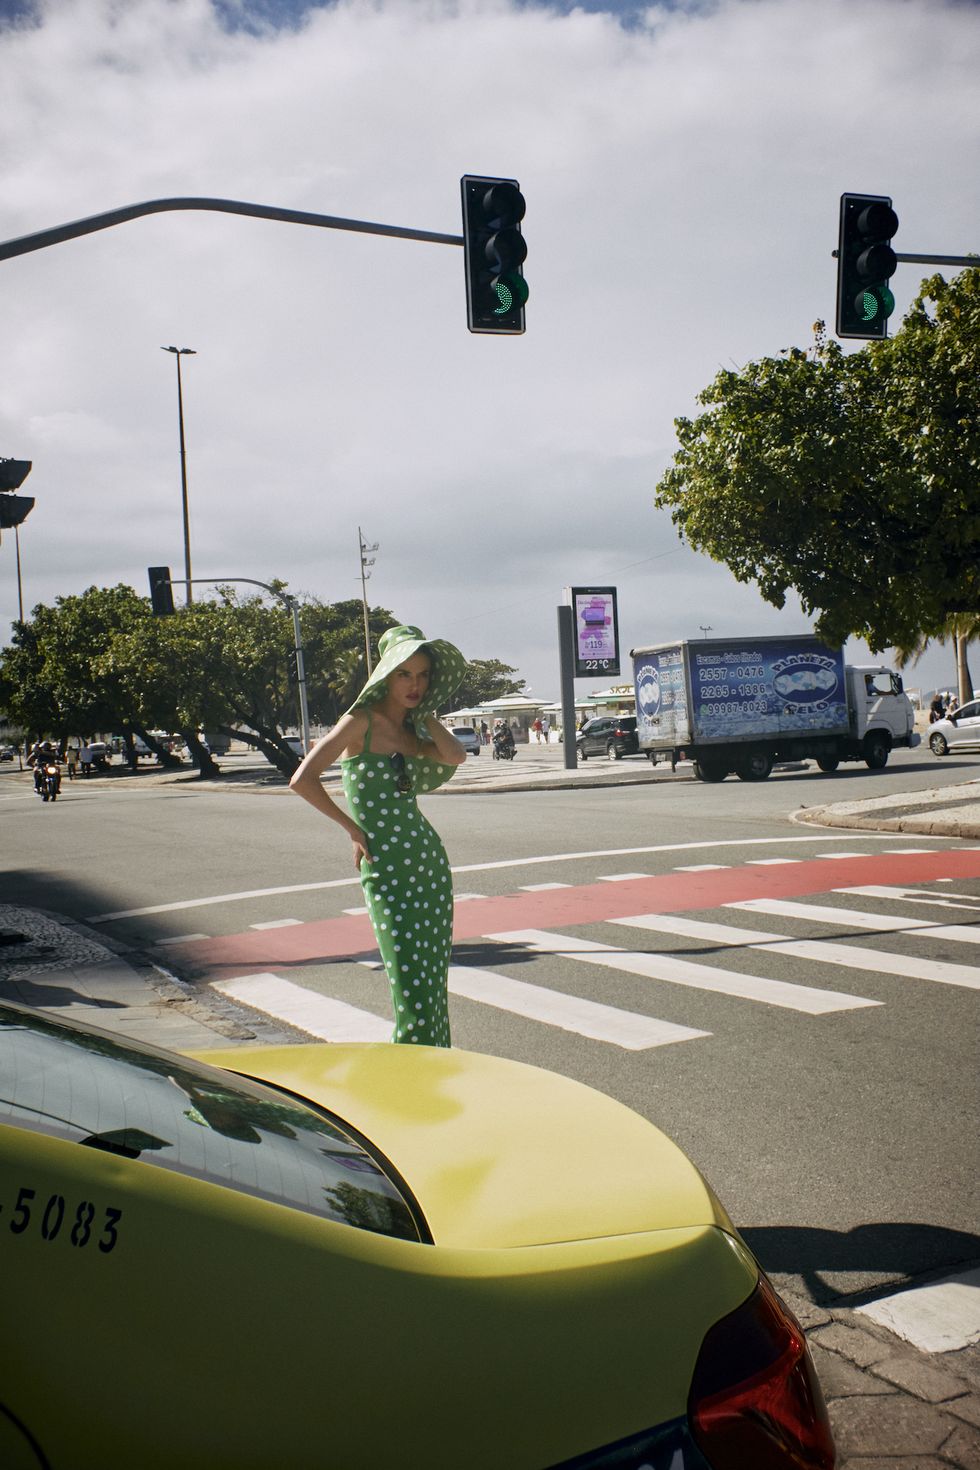 a person in a green dress stands at a crosswalk